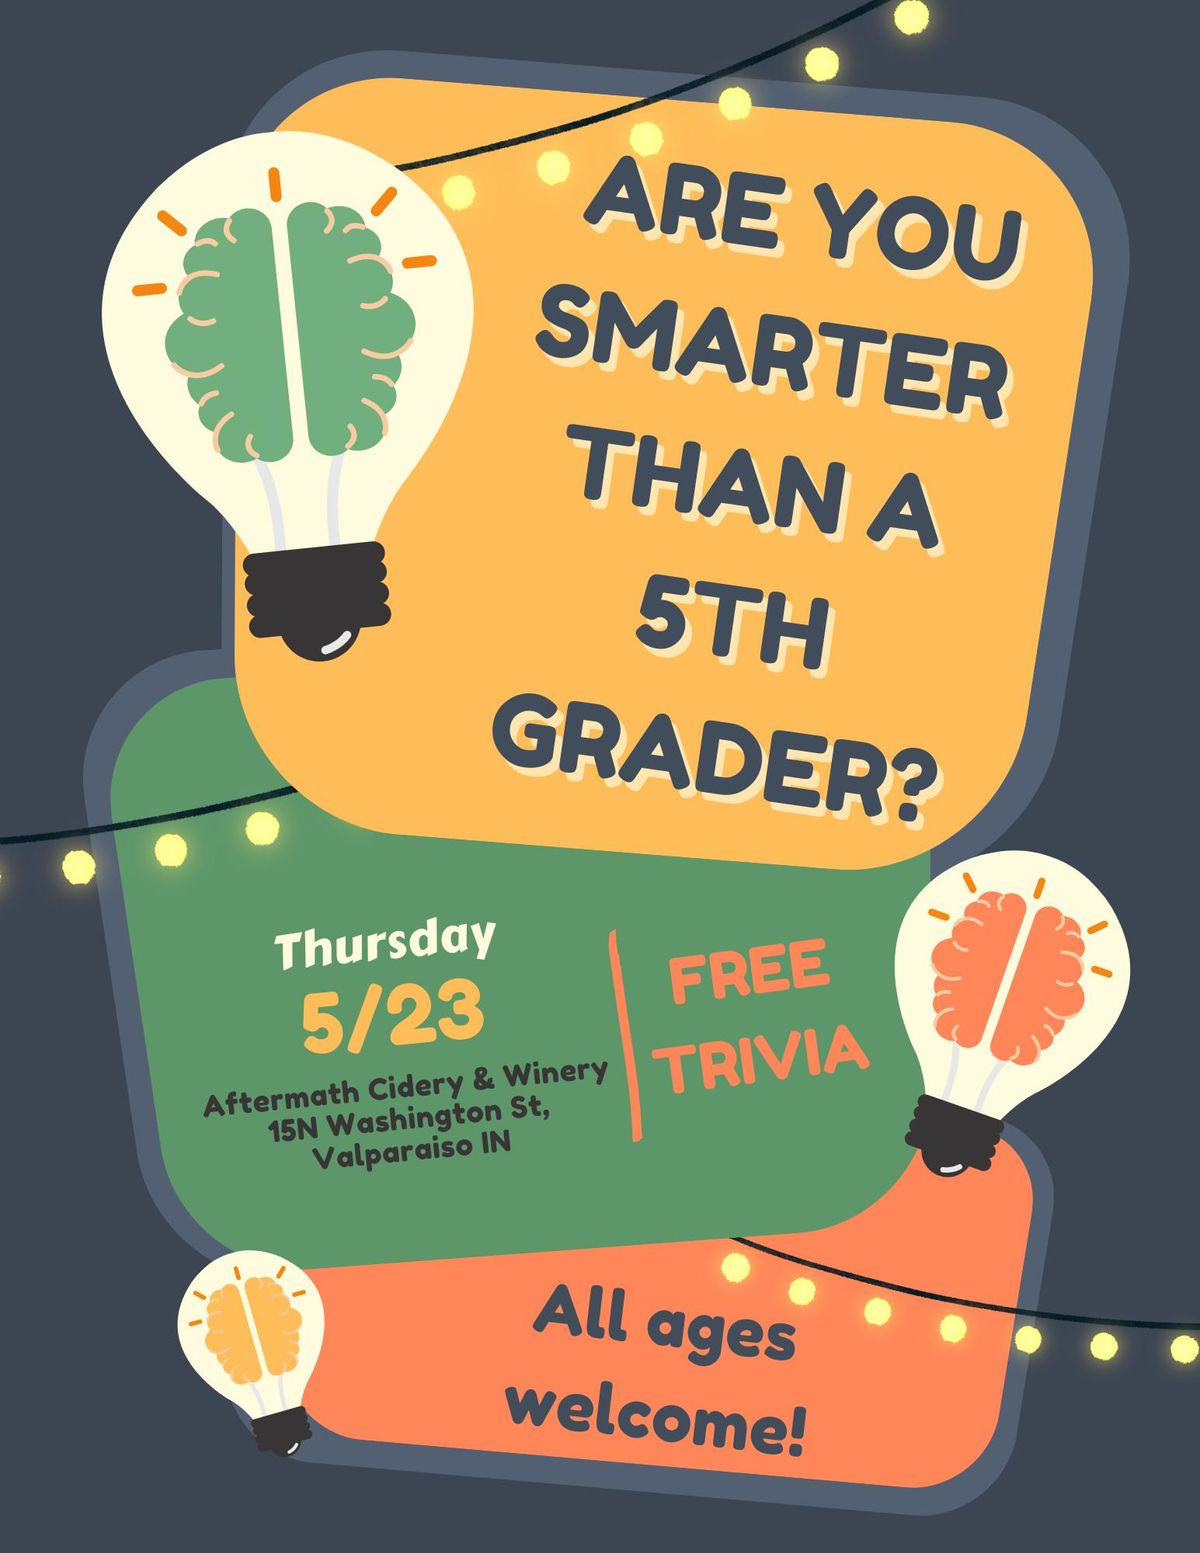 Trivia - Are You Smarter Than a 5th Grader?